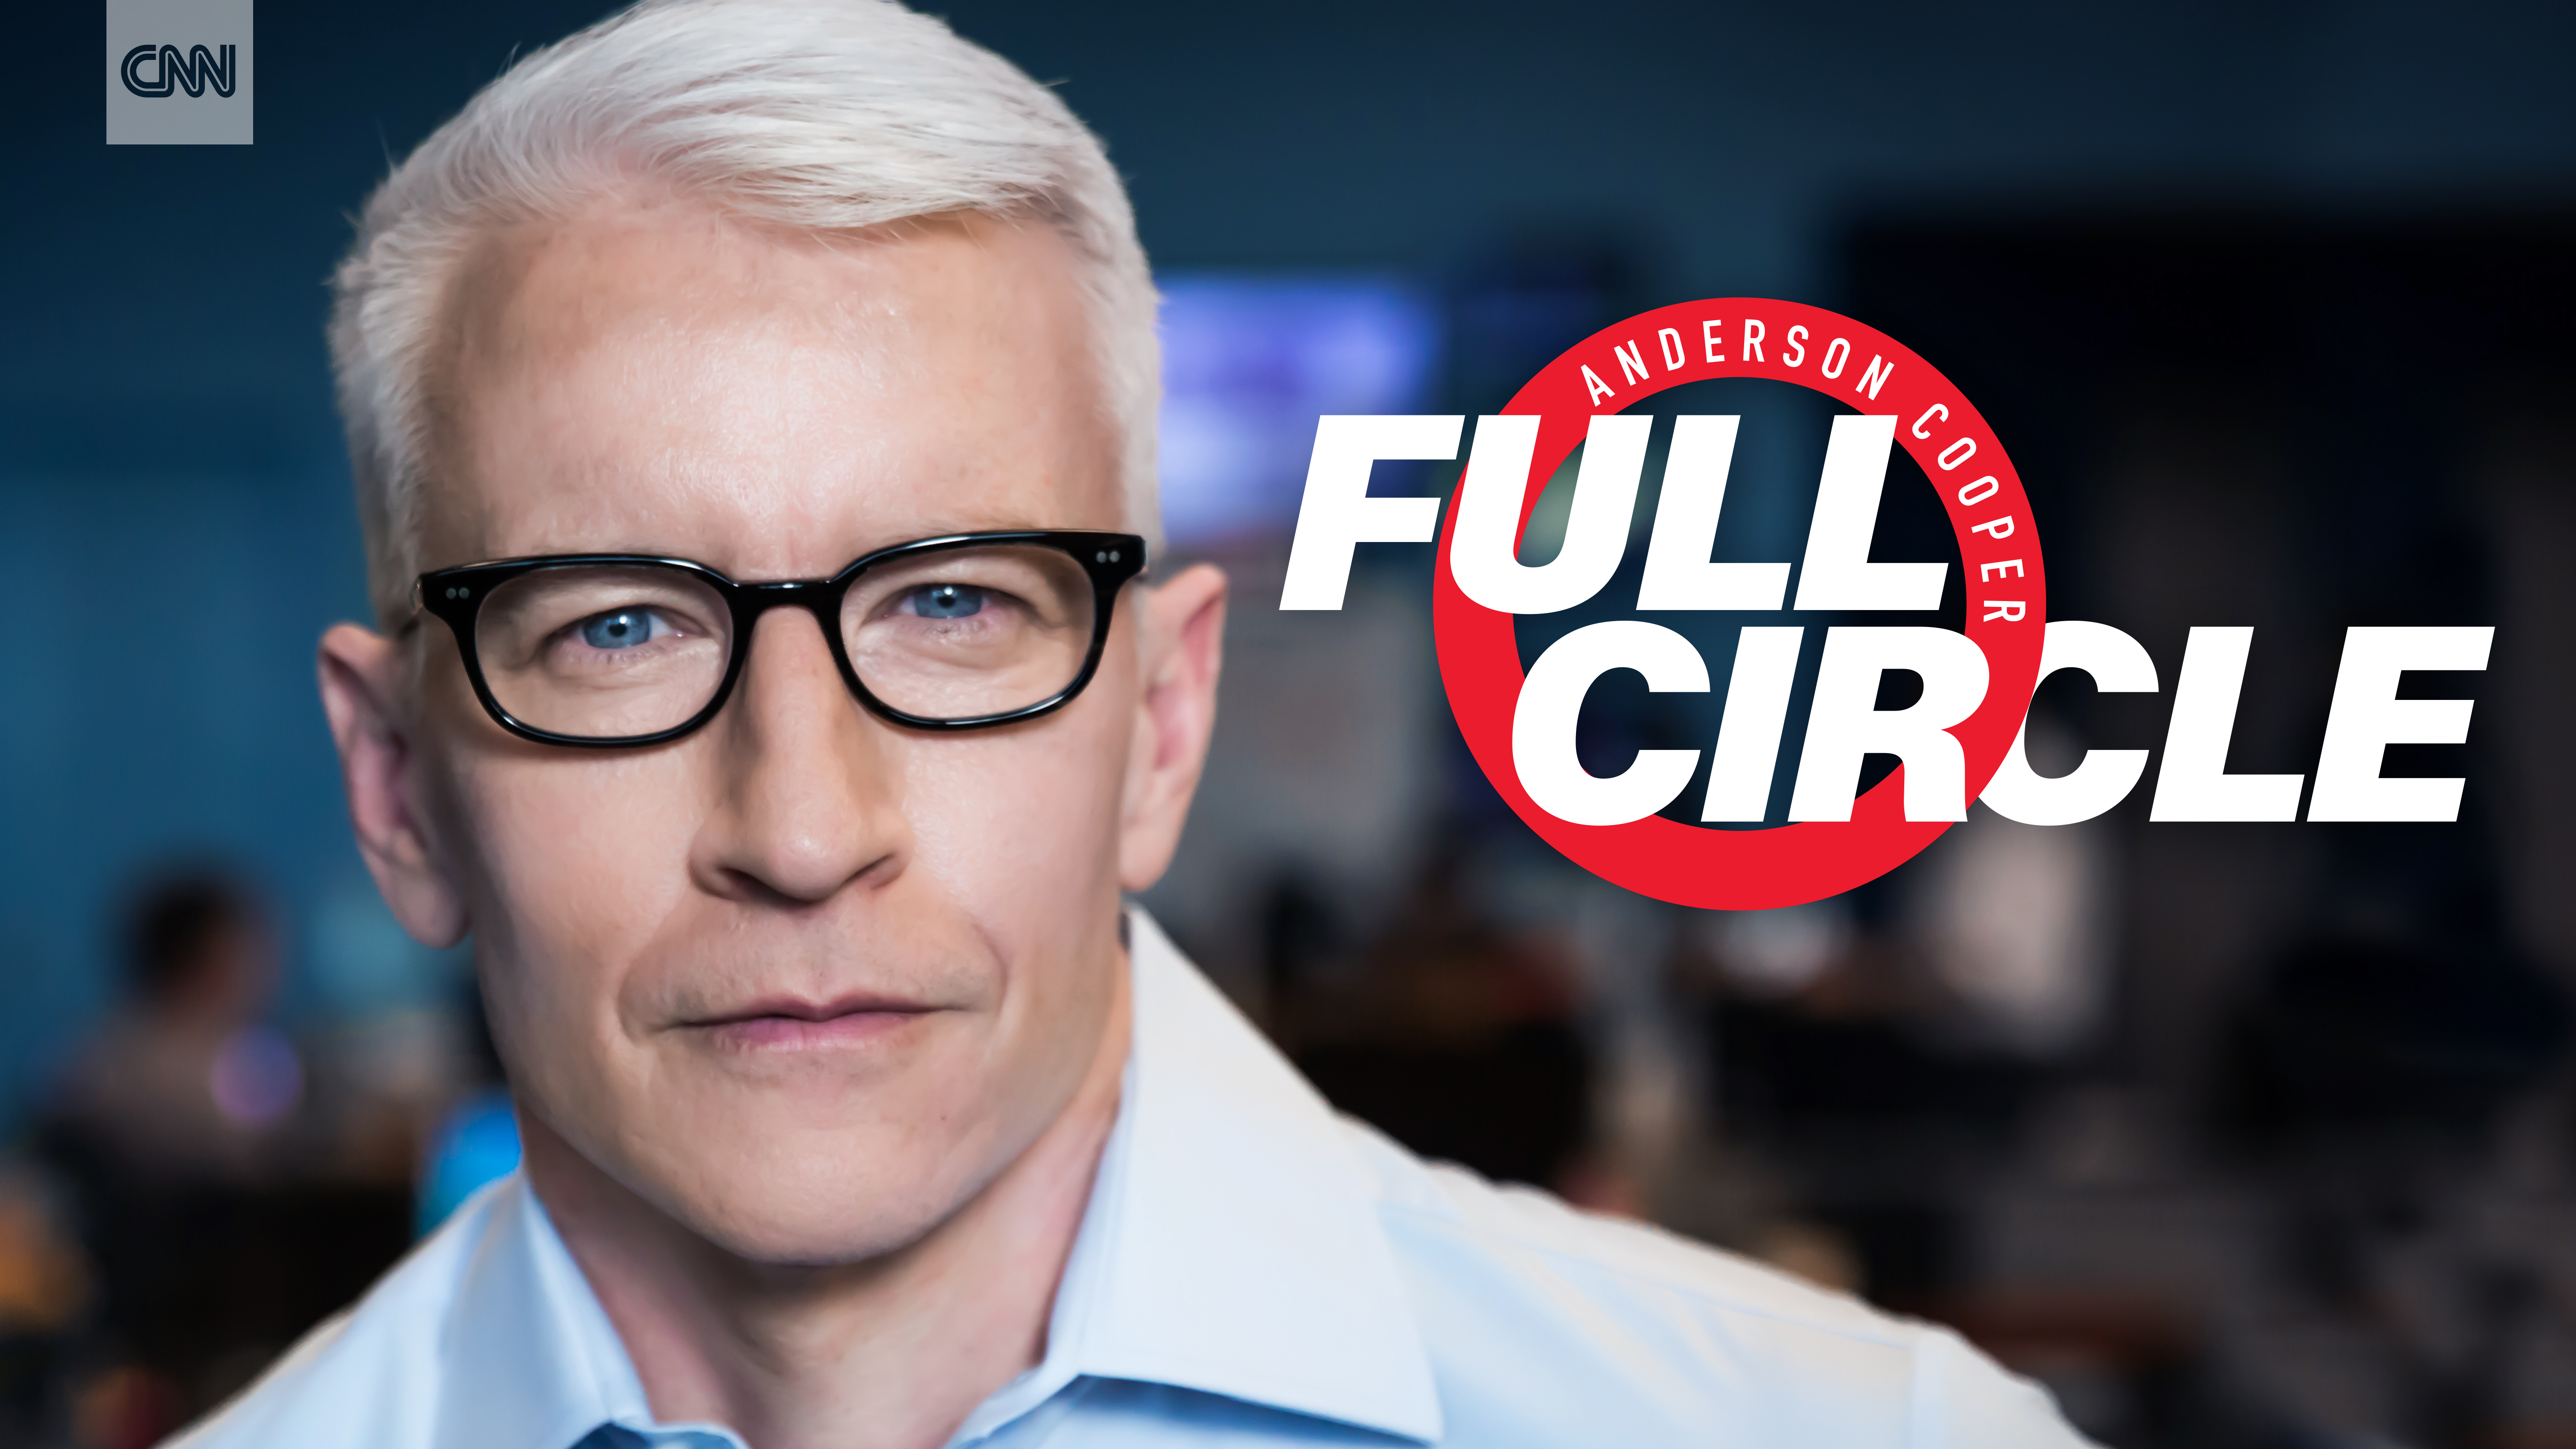 CNN to Launch “Anderson Cooper Full Circle” Show on Facebook Watch